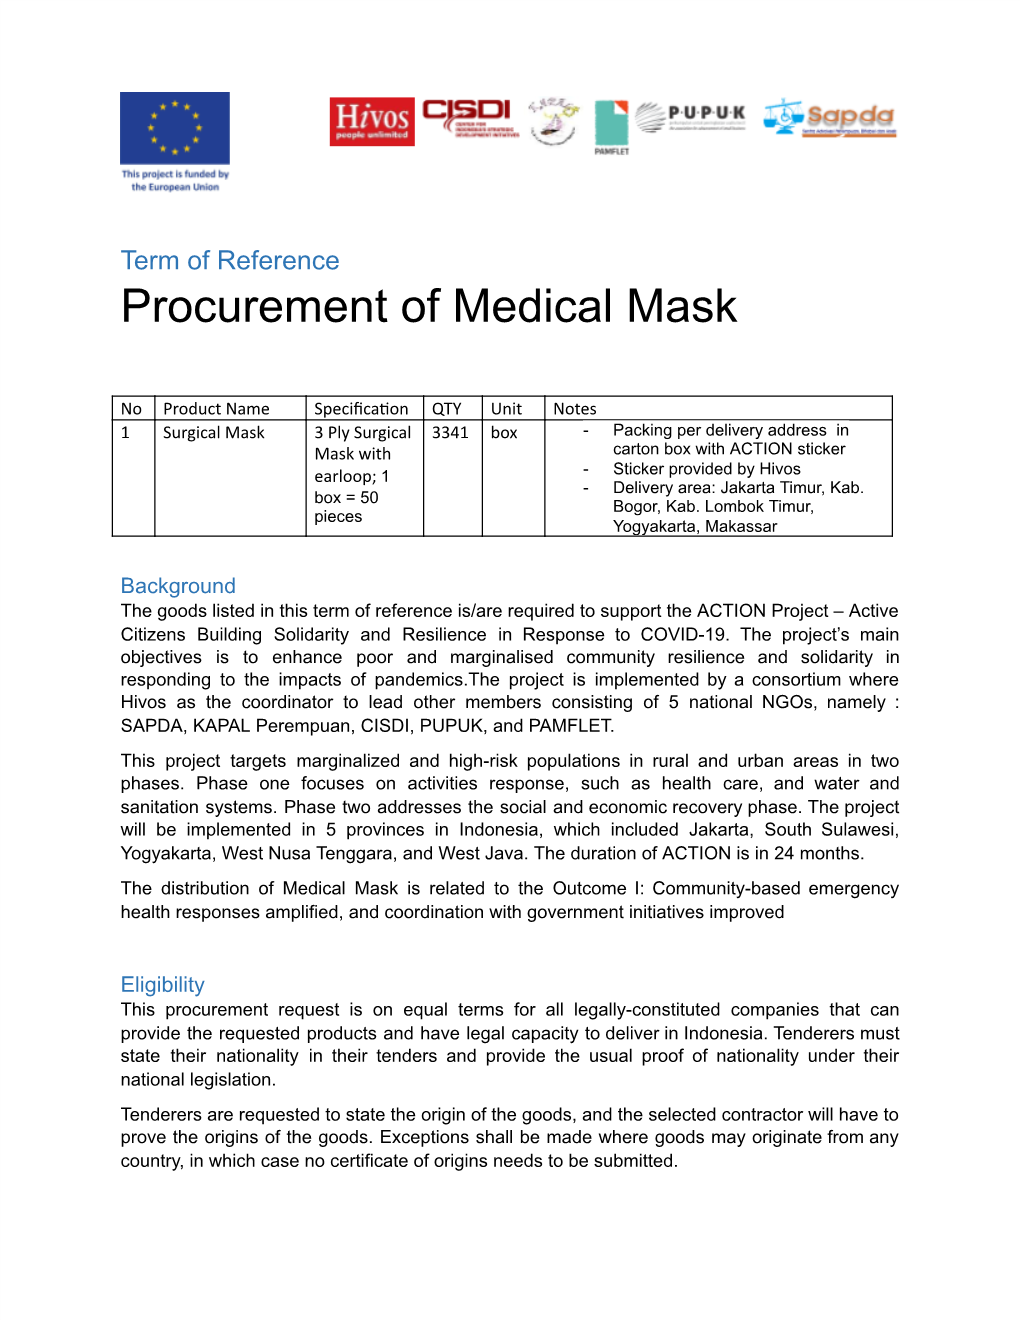 Term of Reference Procurement of Medical Mask